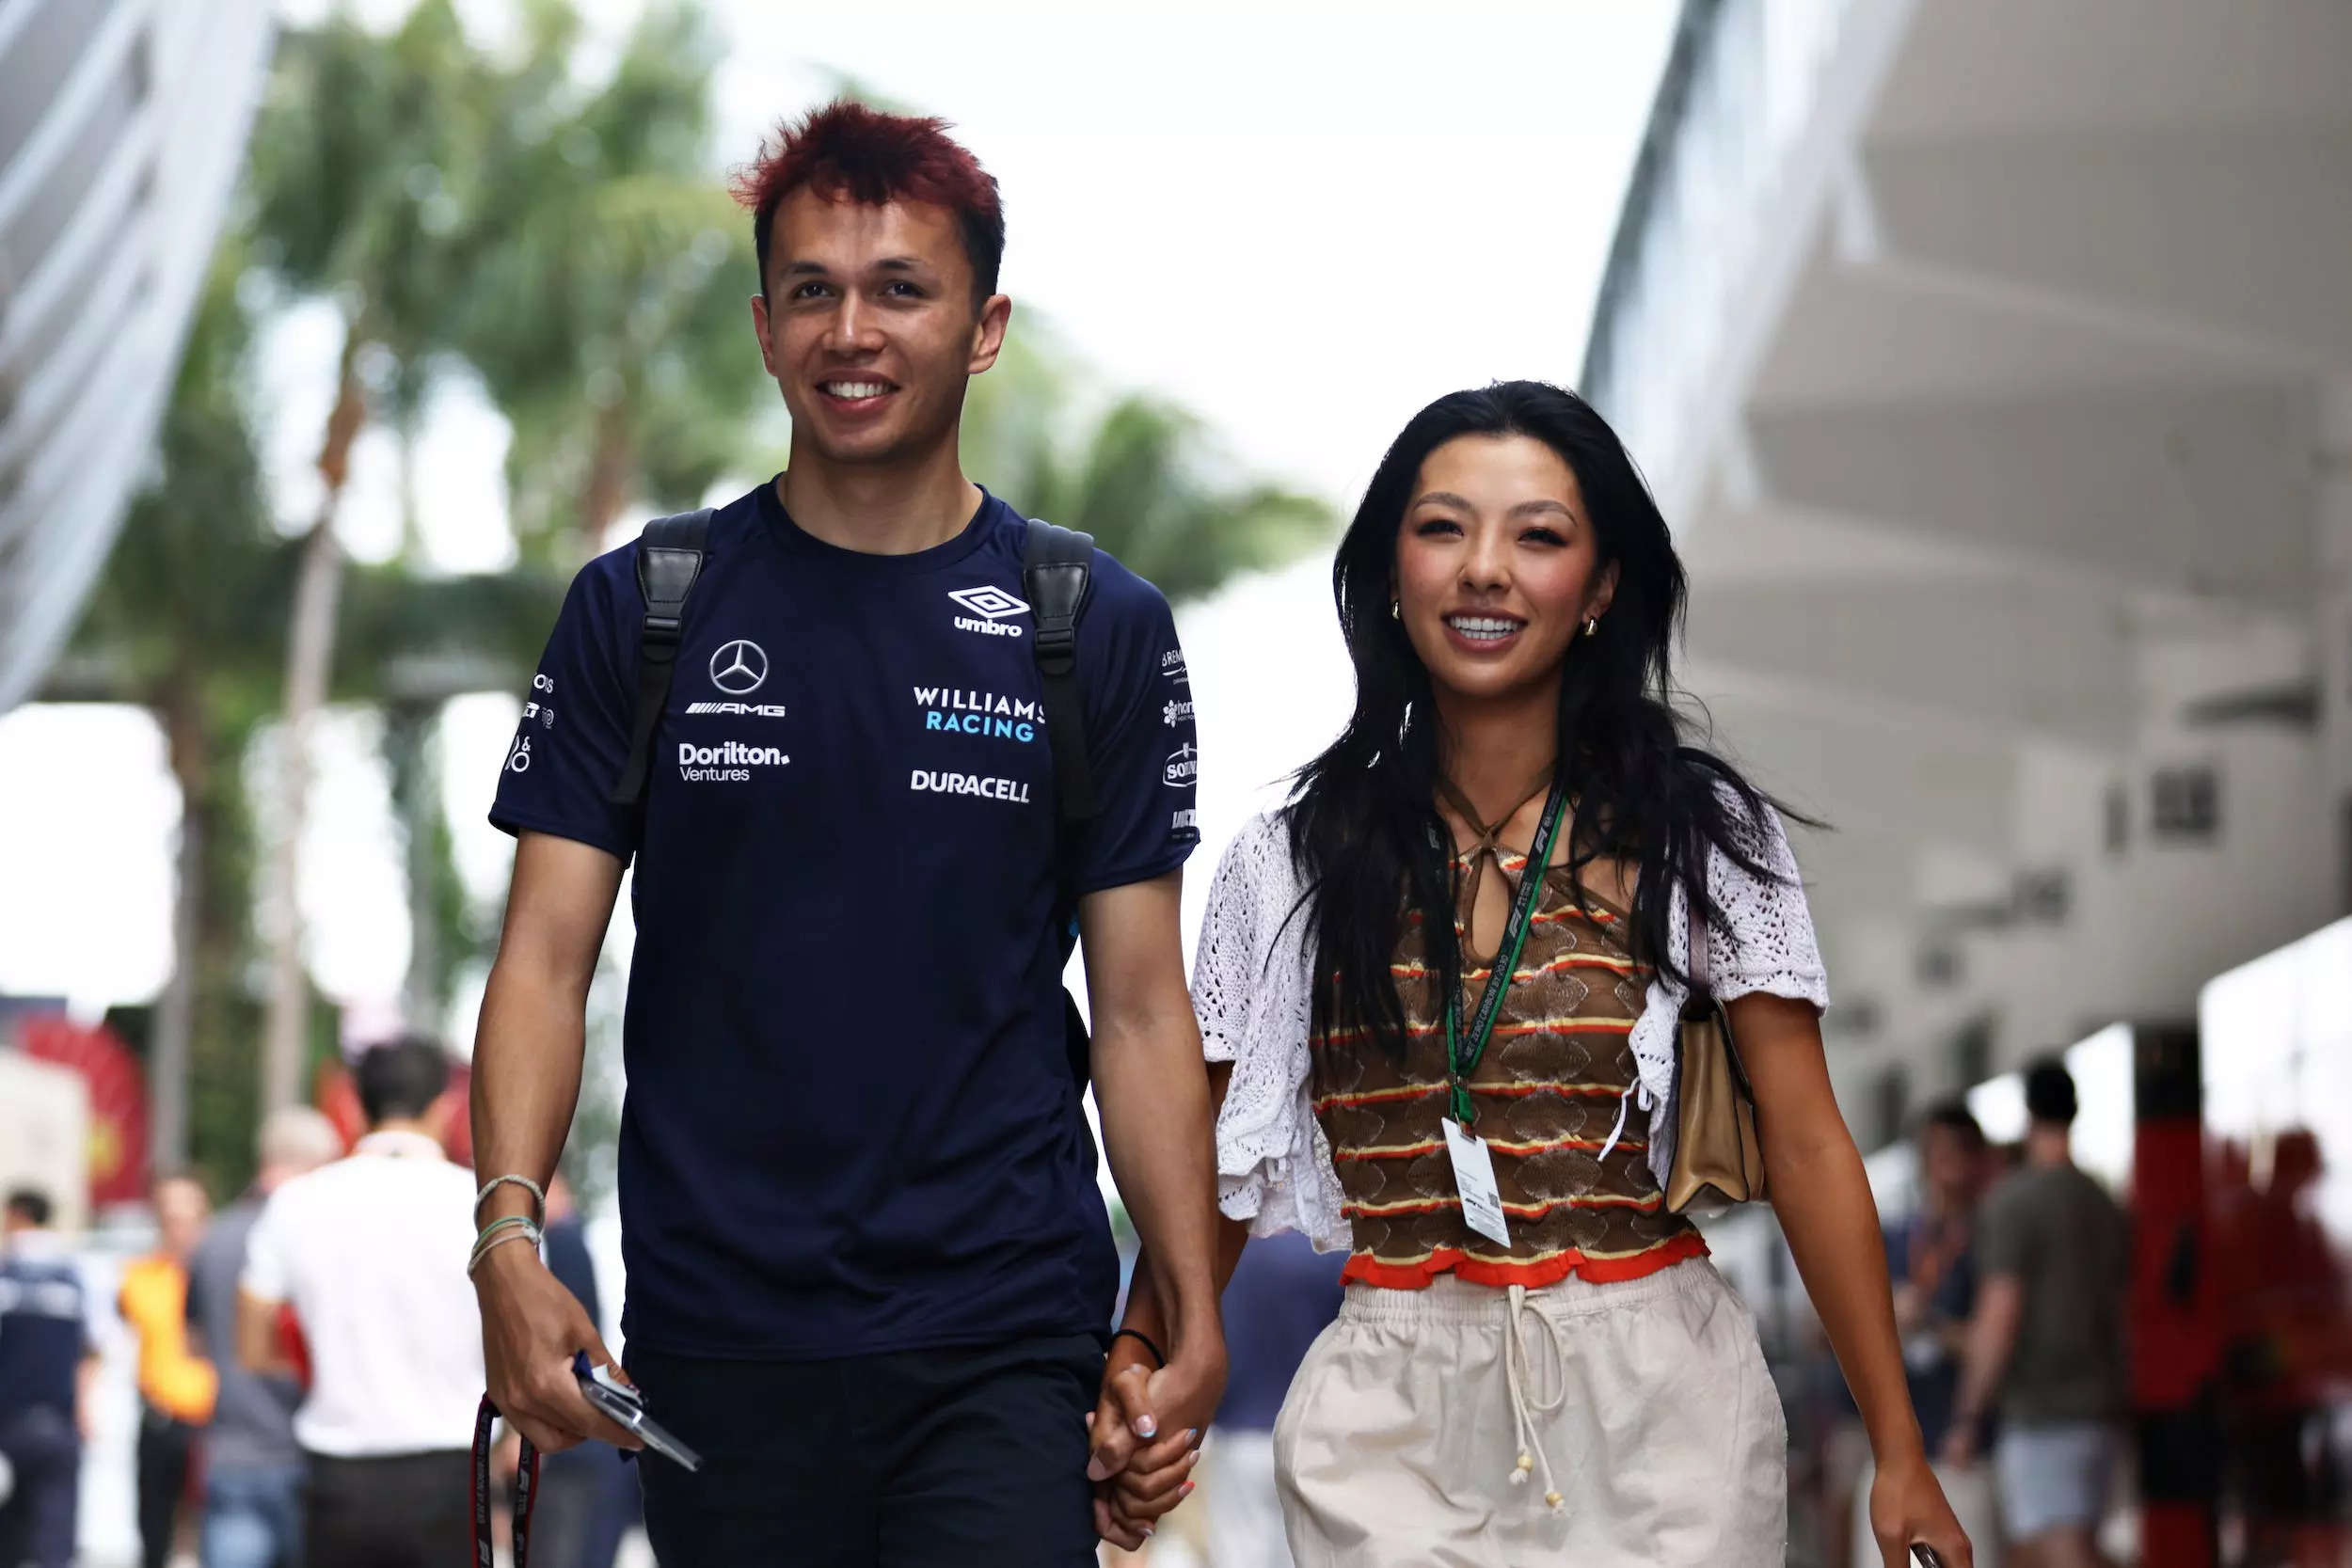 Alex Albon is back in F1 and scoring points after a year away working